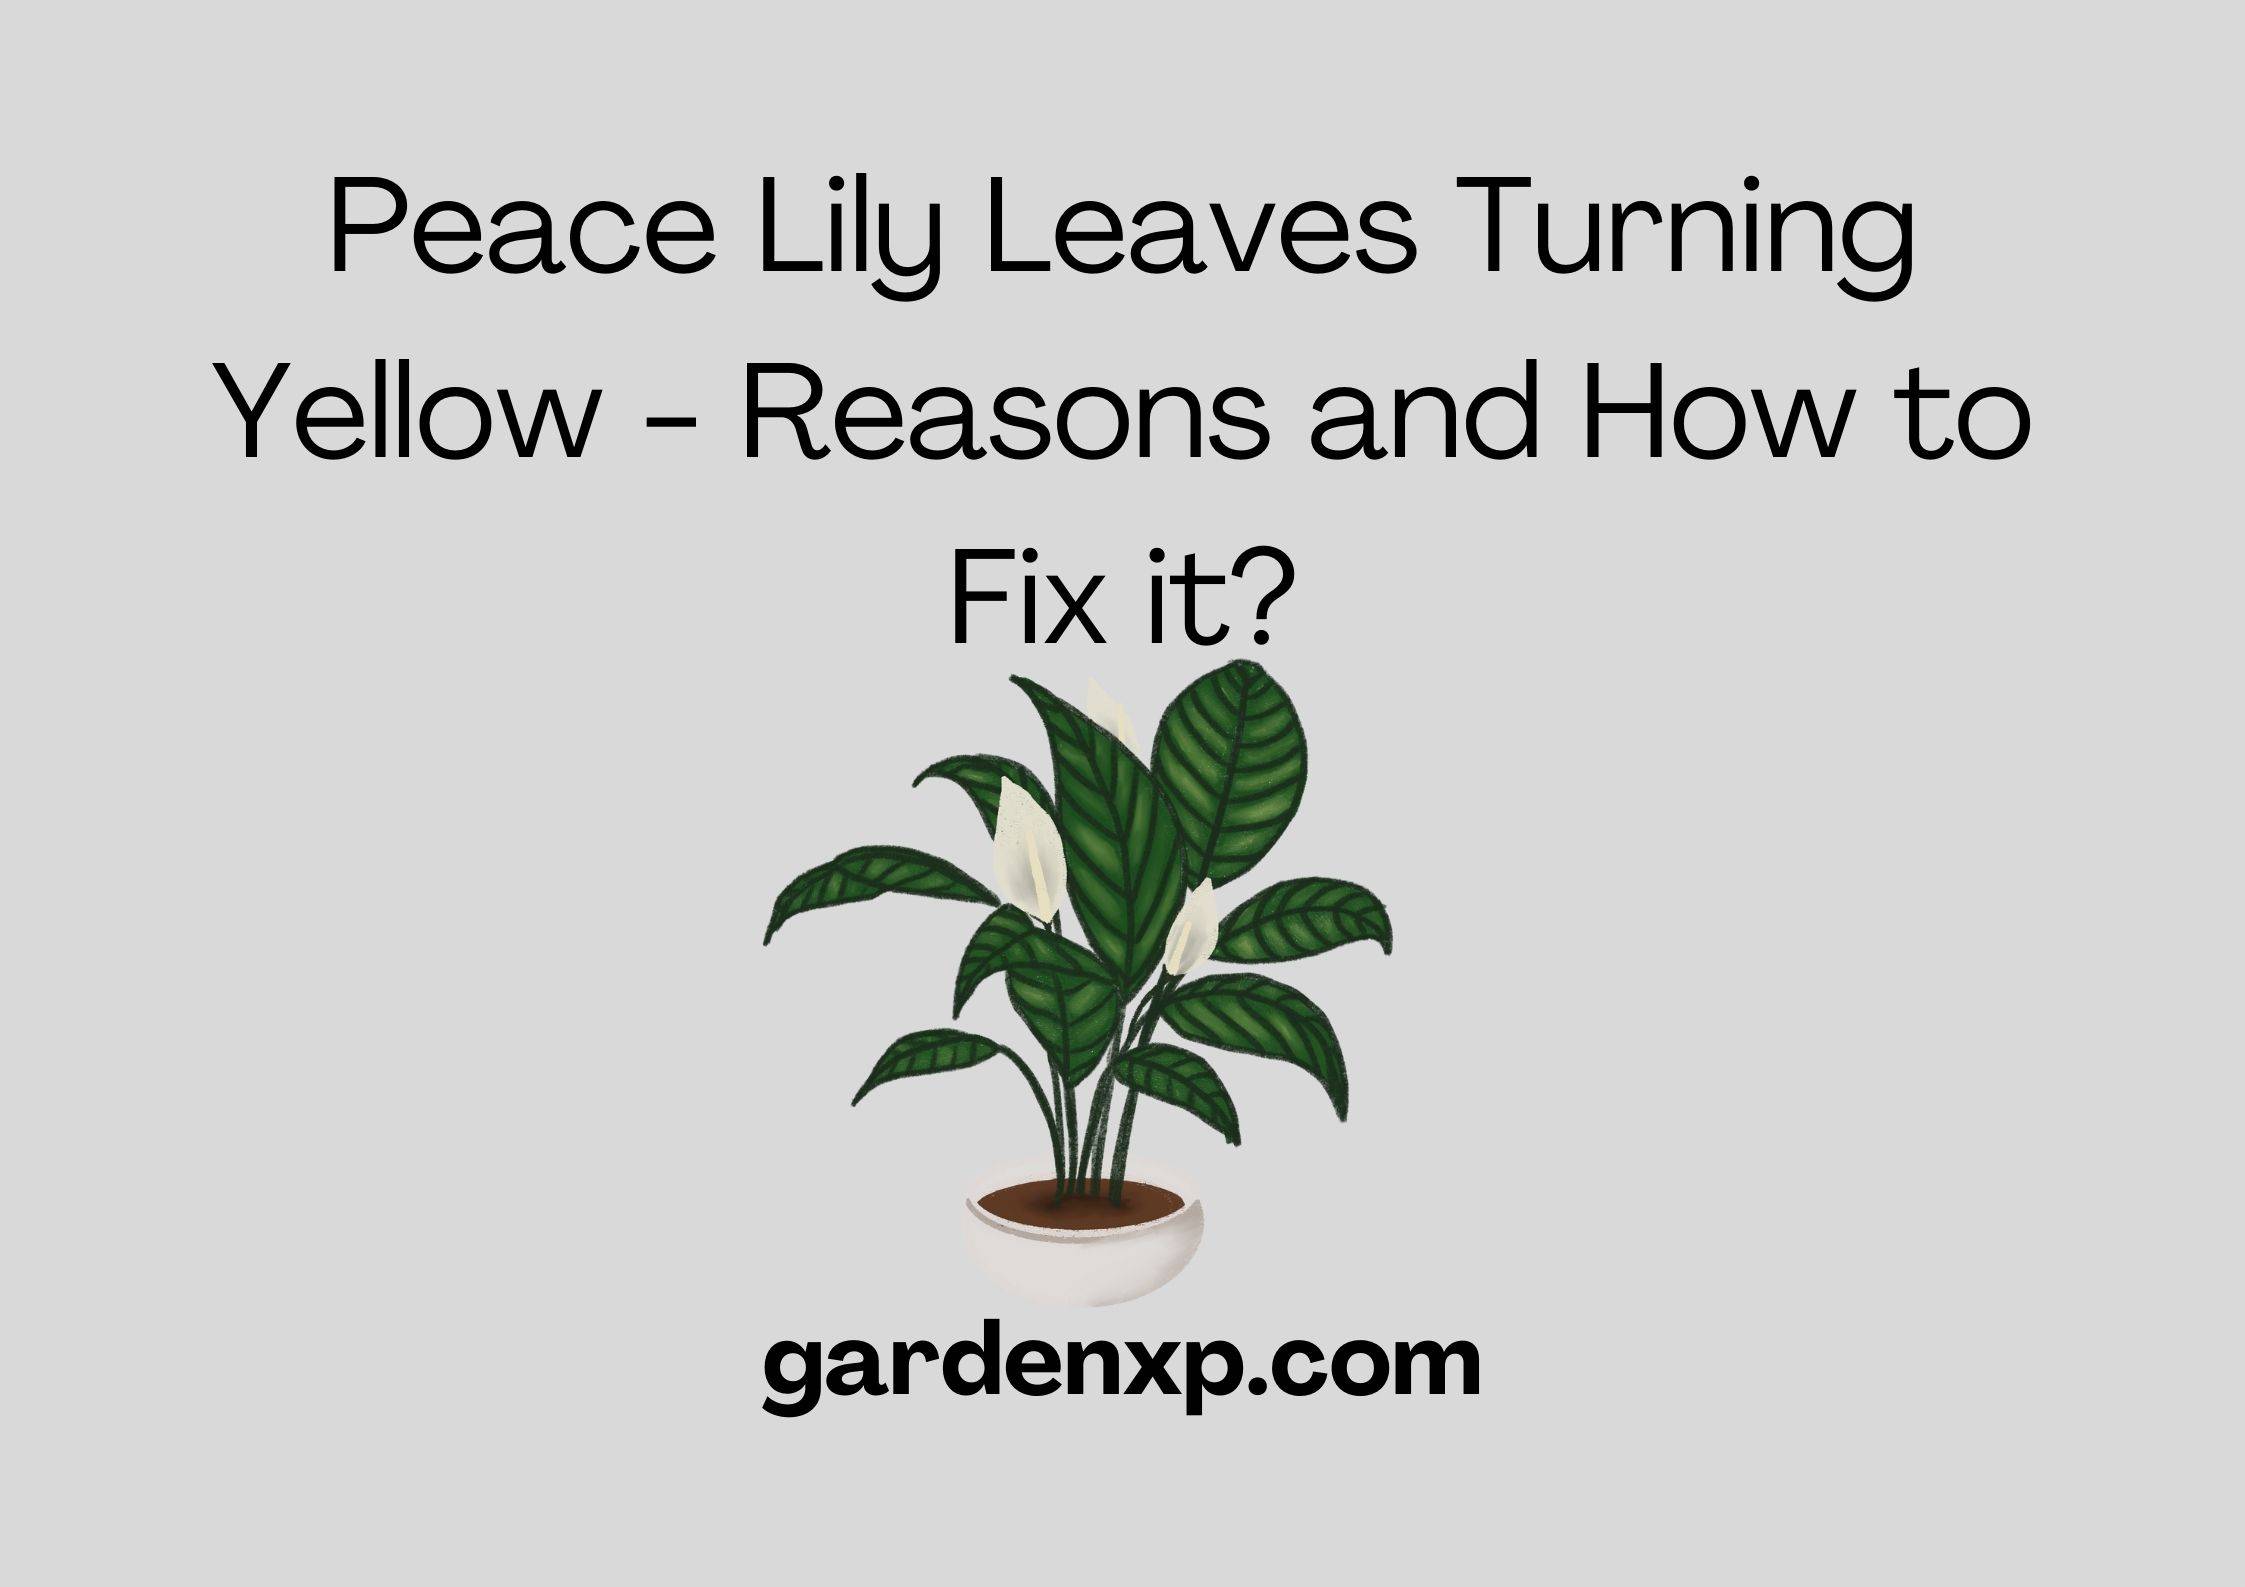 Peace Lily Leaves Turning Yellow - Reasons and How to Fix it?